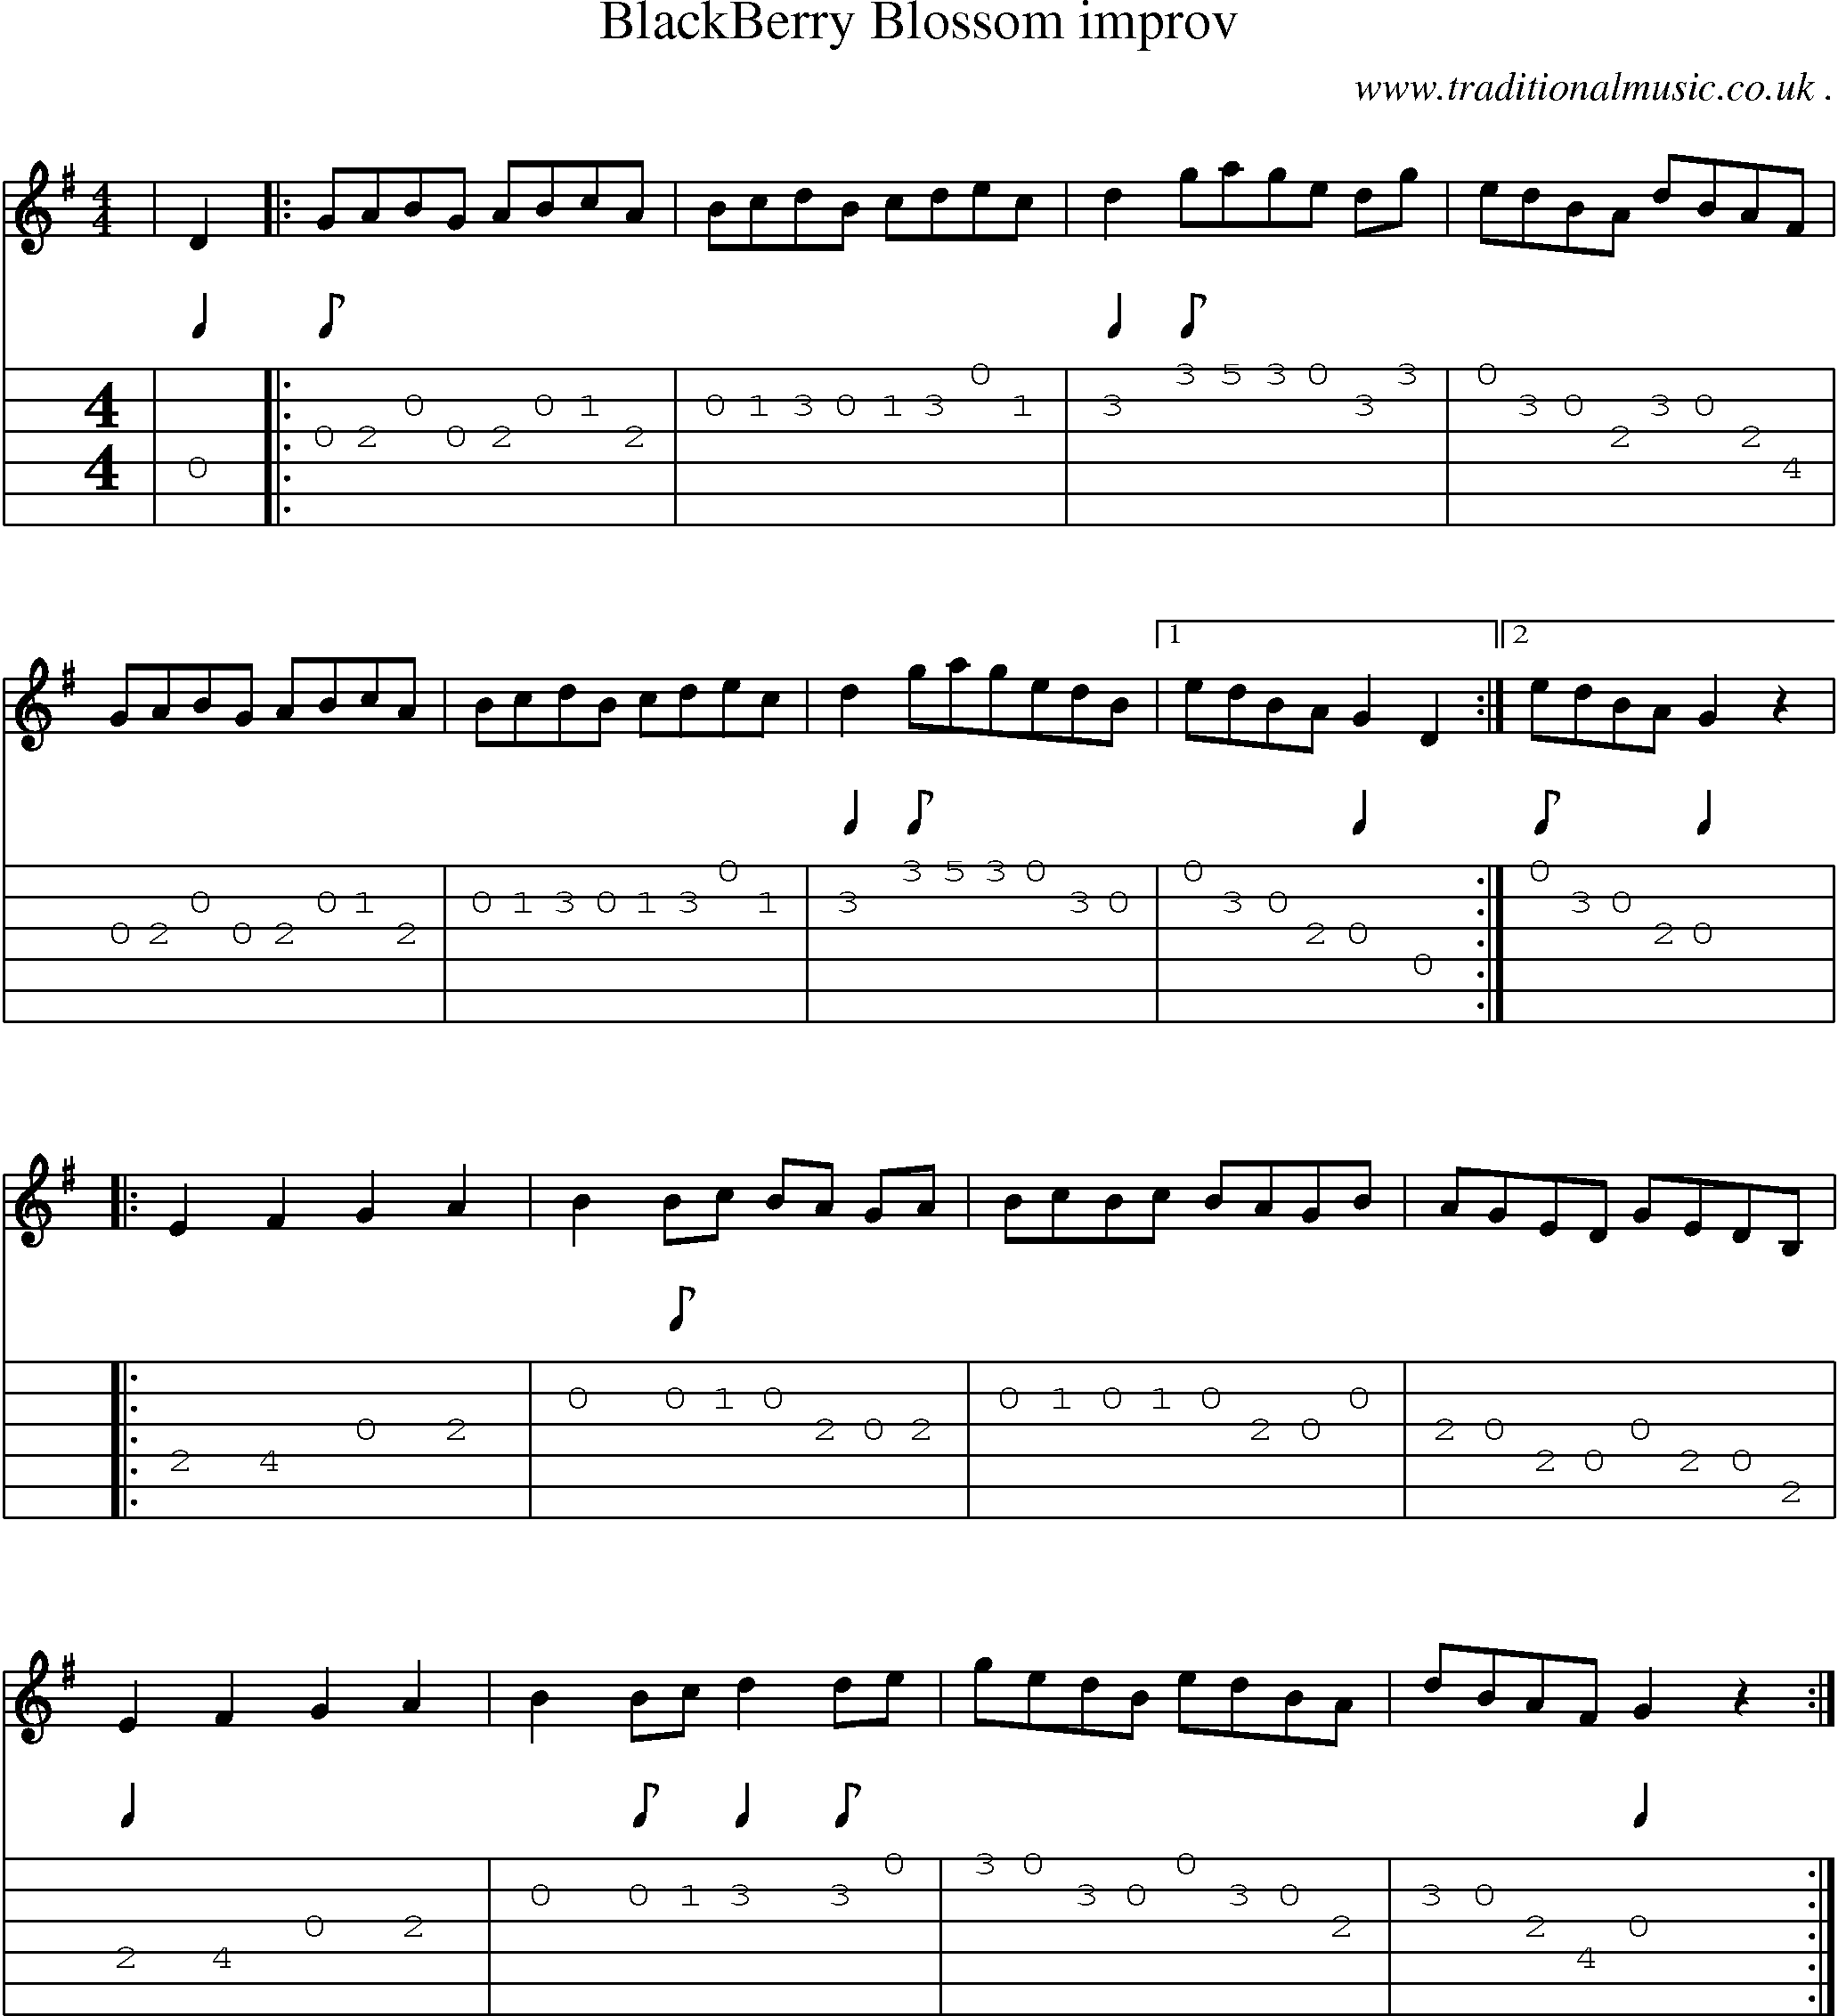 Music Score and Guitar Tabs for Blackberry Blossom Improv